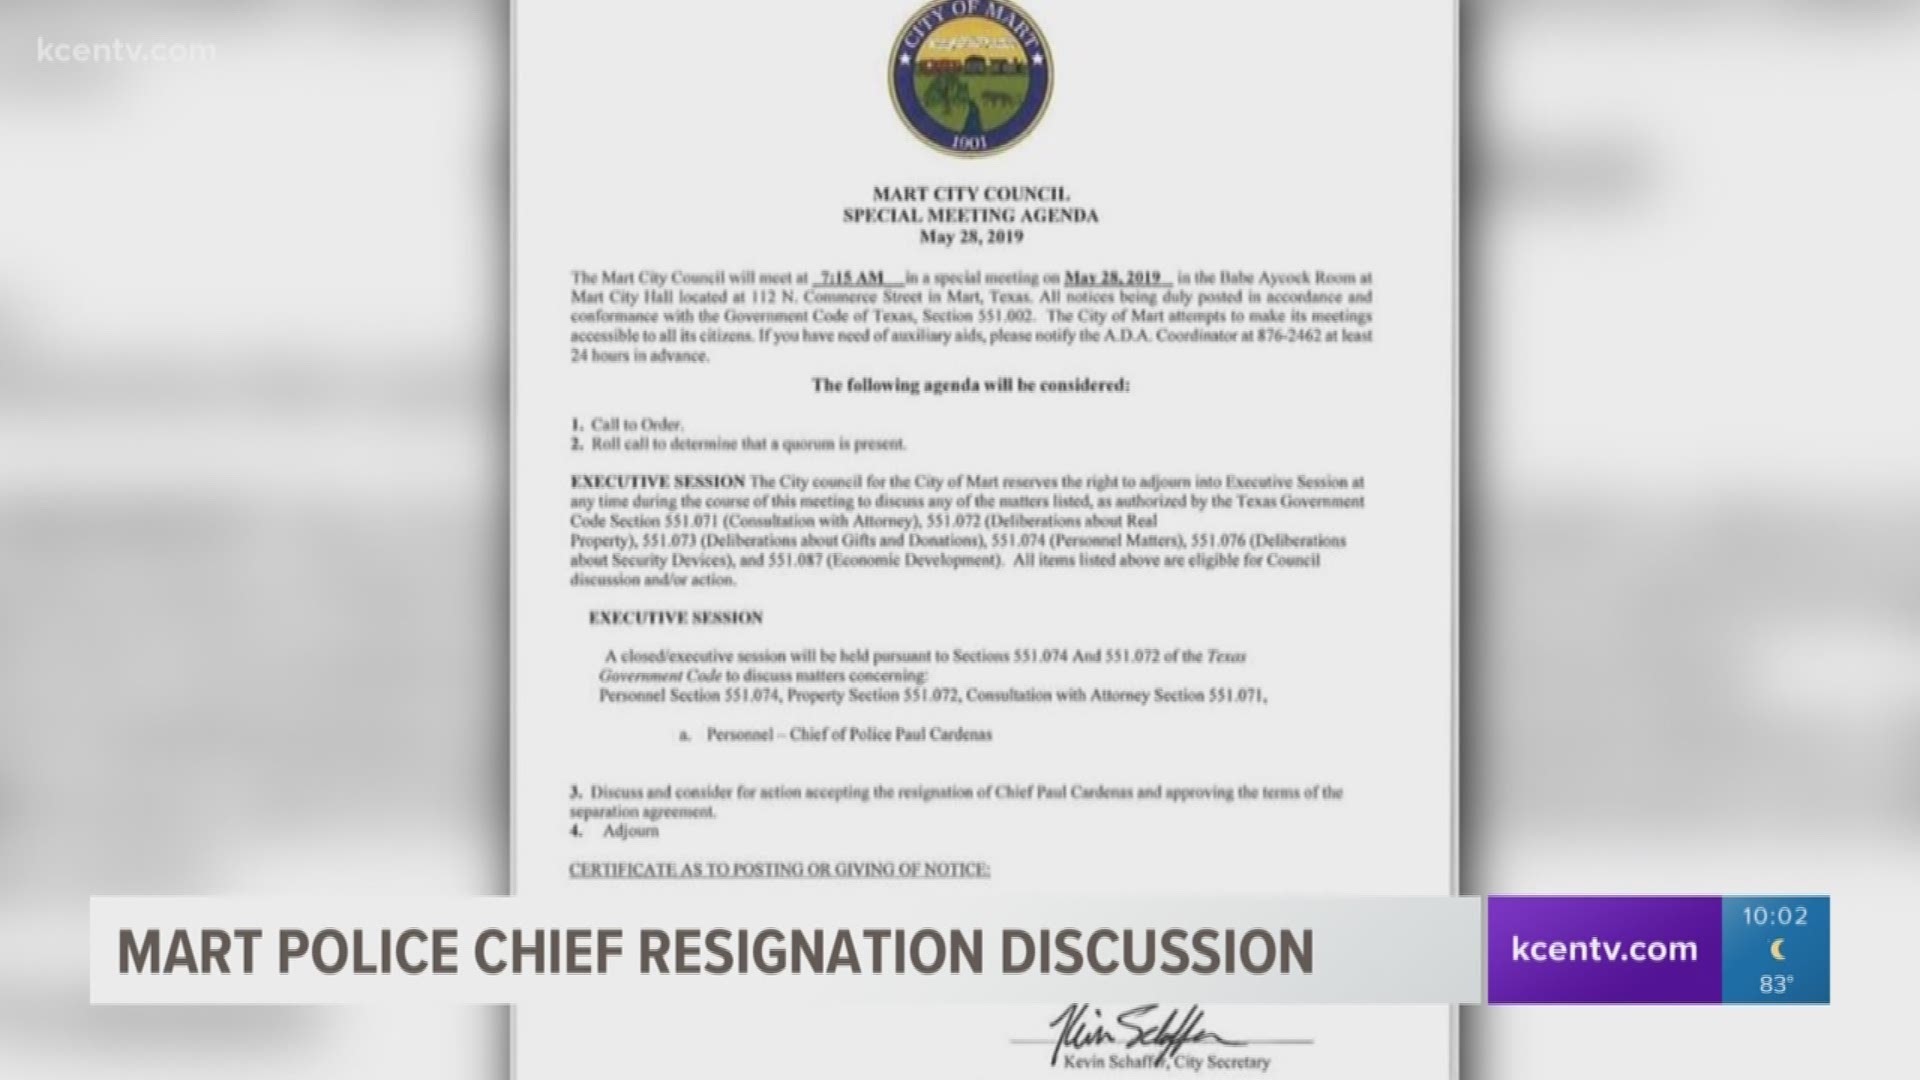 The city council scheduled a special meeting to discuss the resignation of police chief Paul Cardenas.